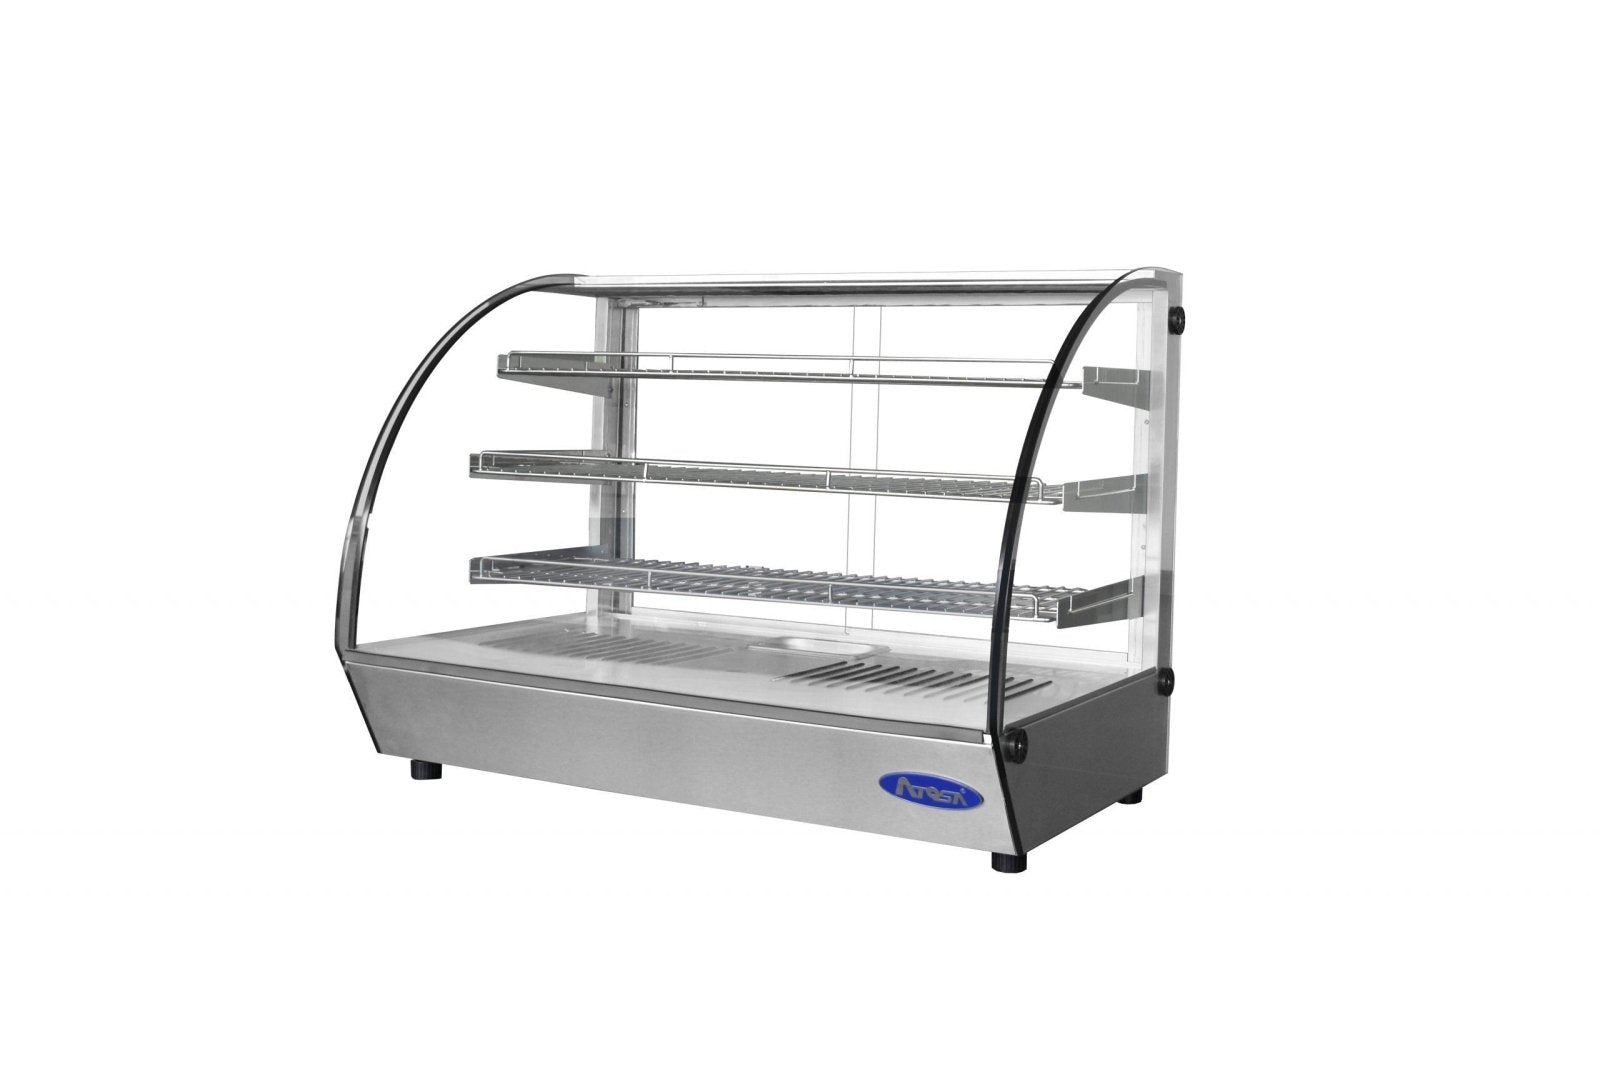 Atosa CHDC-56 Countertop Heated Curved Display Case, 5.6 cu ft, 3 Stainless Steel Shelves - TheChefStore.Com